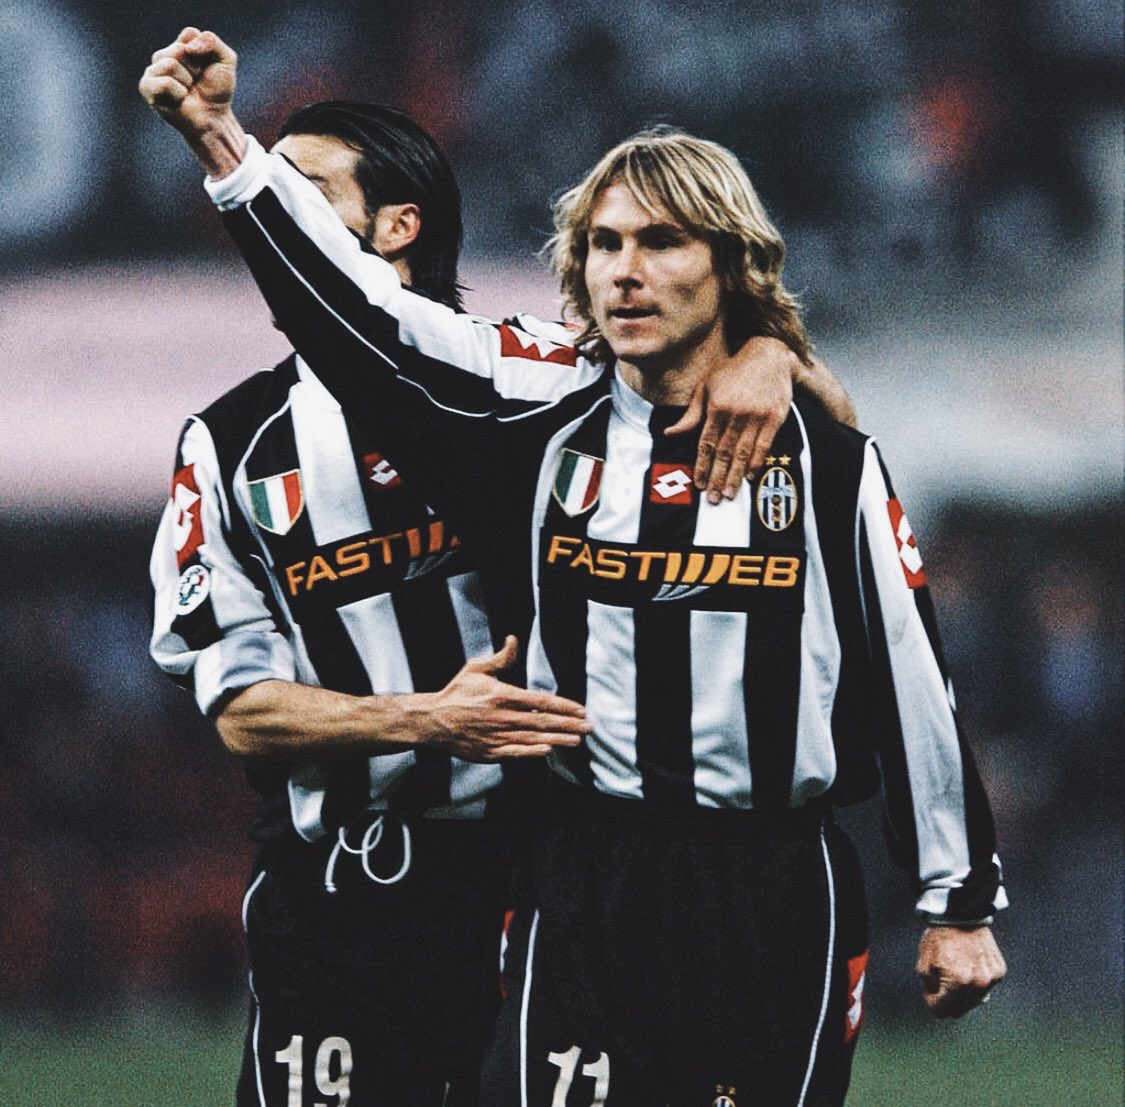 Happy 48th birthday to the \Czech Cannon\ Pavel Nedved    